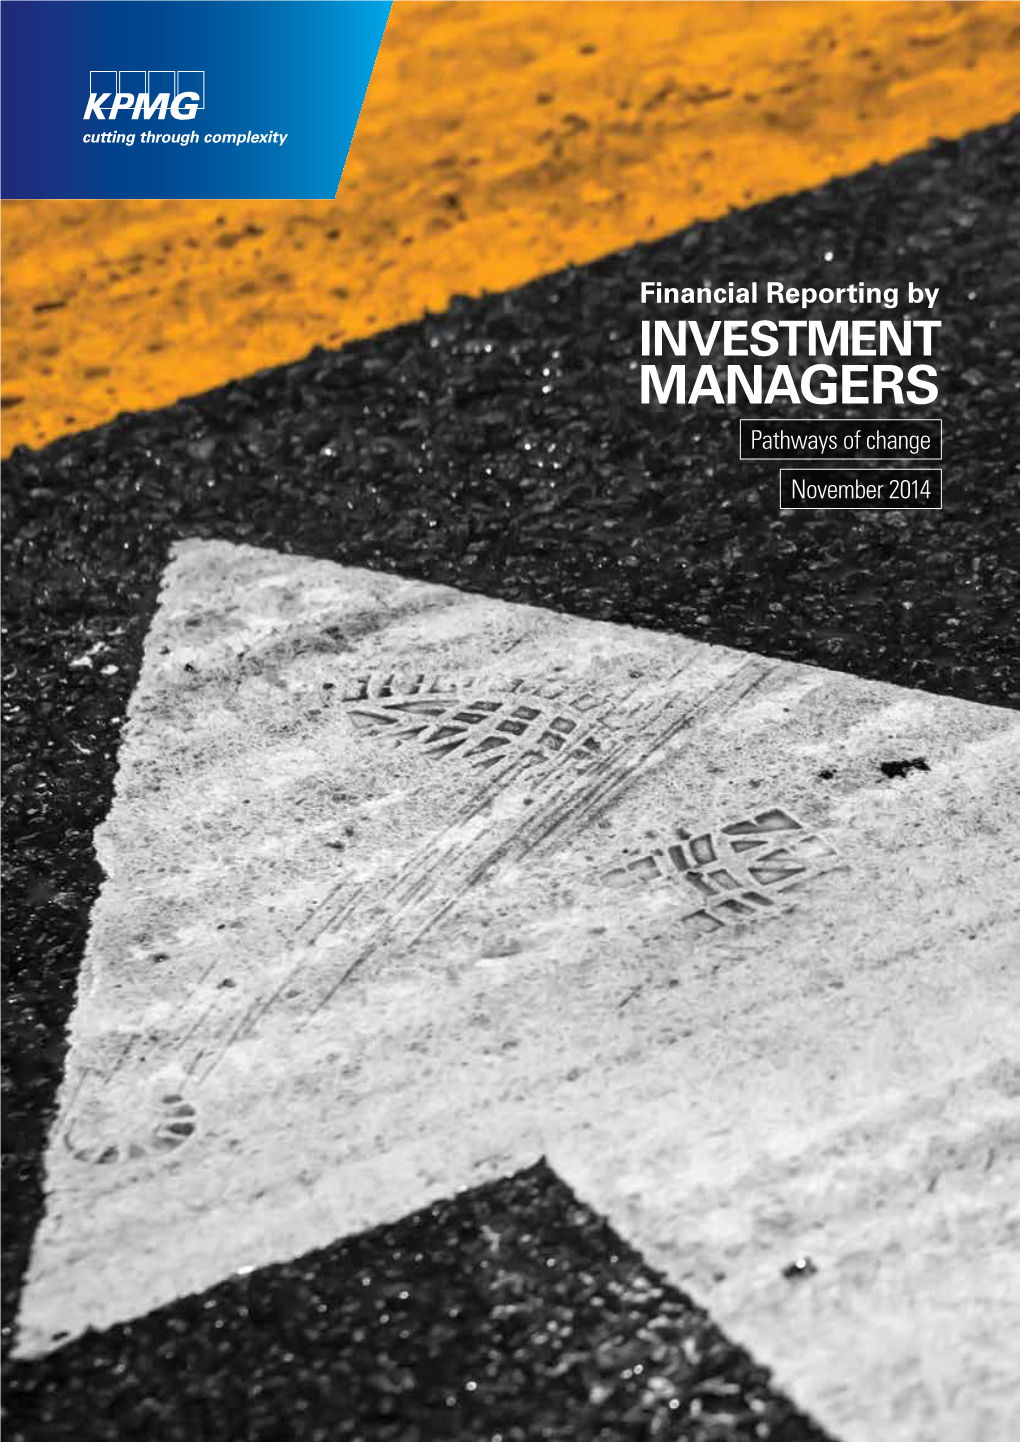 Financial Reporting by INVESTMENT MANAGERS Pathways of Change November 2014 Financial Reporting by INVESTMENT MANAGERS Pathways of Change